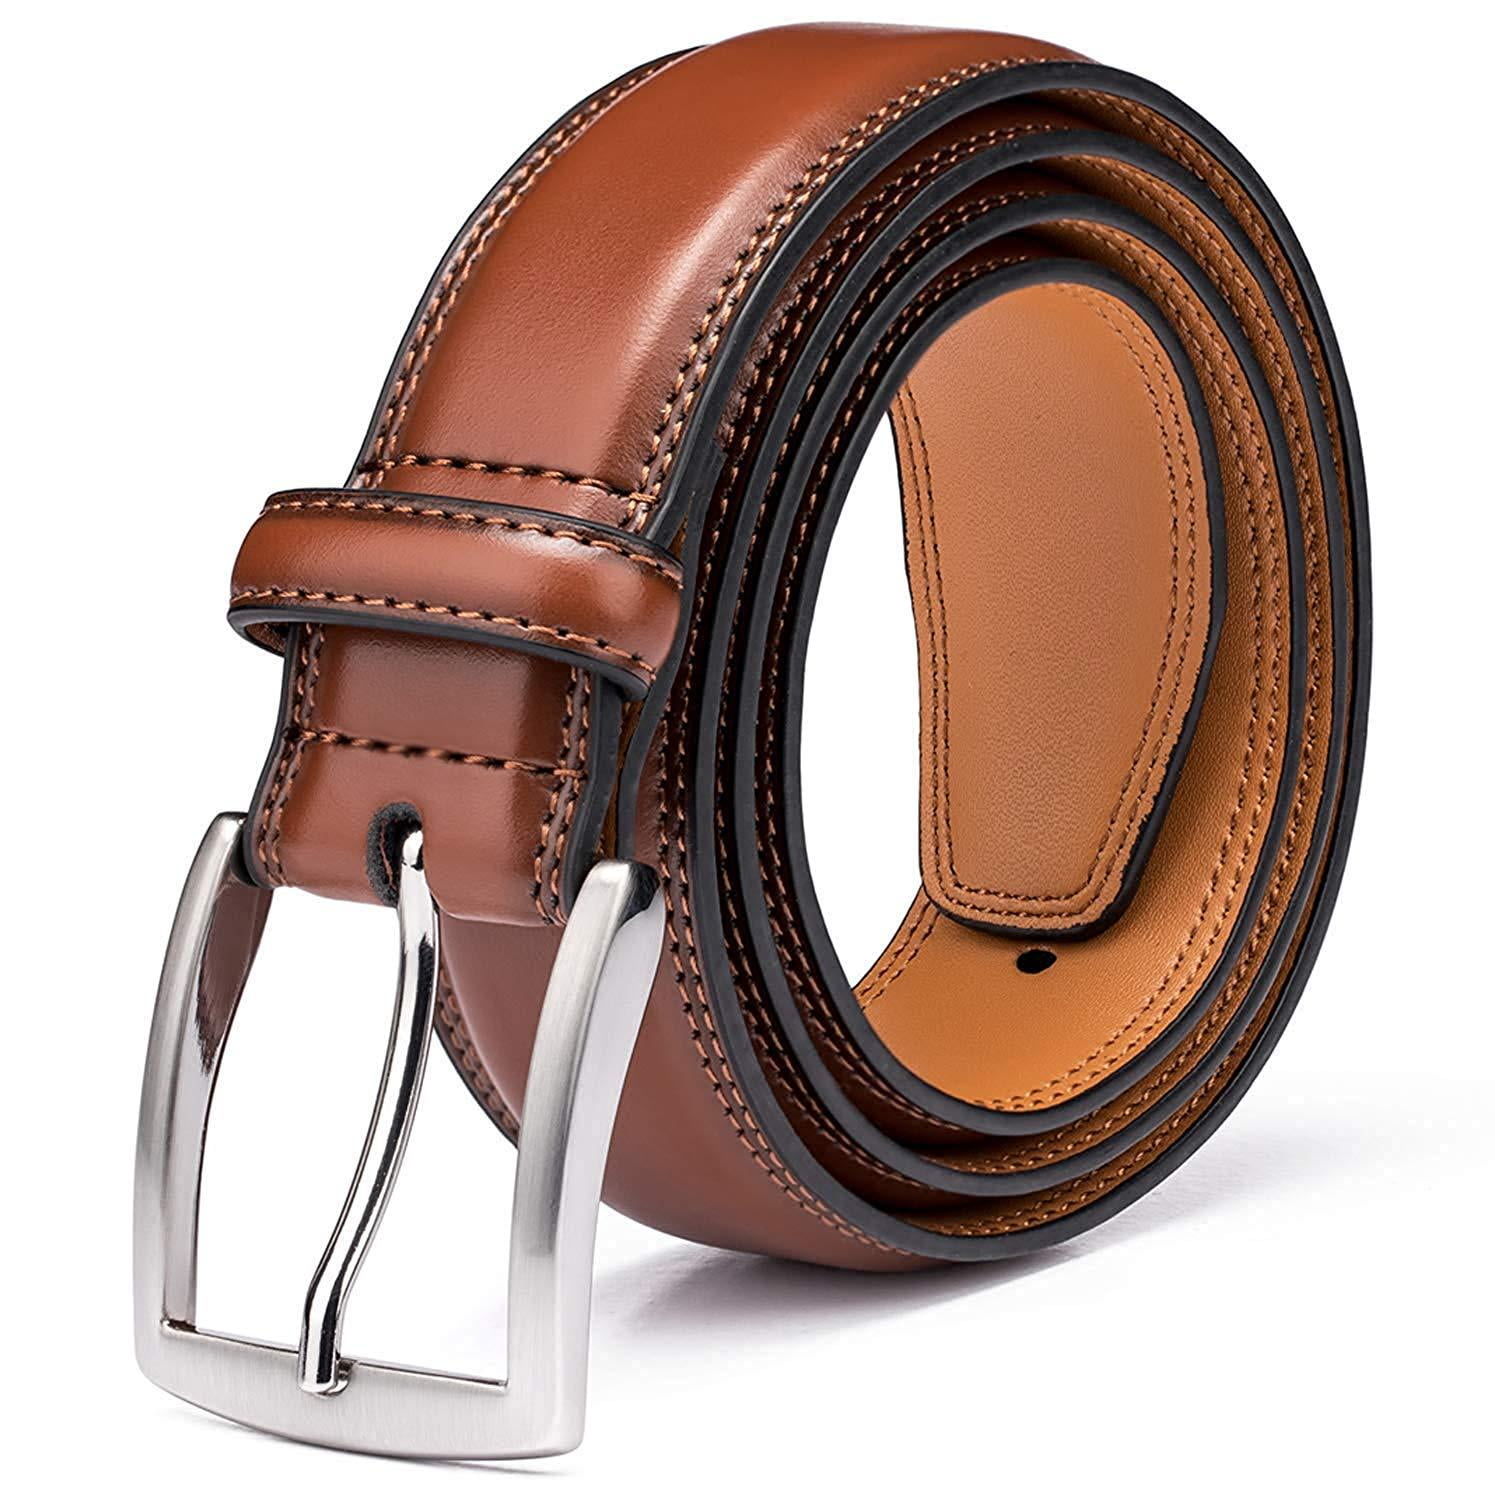 Wholesale Genuine Leather Designer Belts For Men And Women Pin Buckle  Casual Strap For Jeans And More Style G5313 From Agg4bi, $3.19